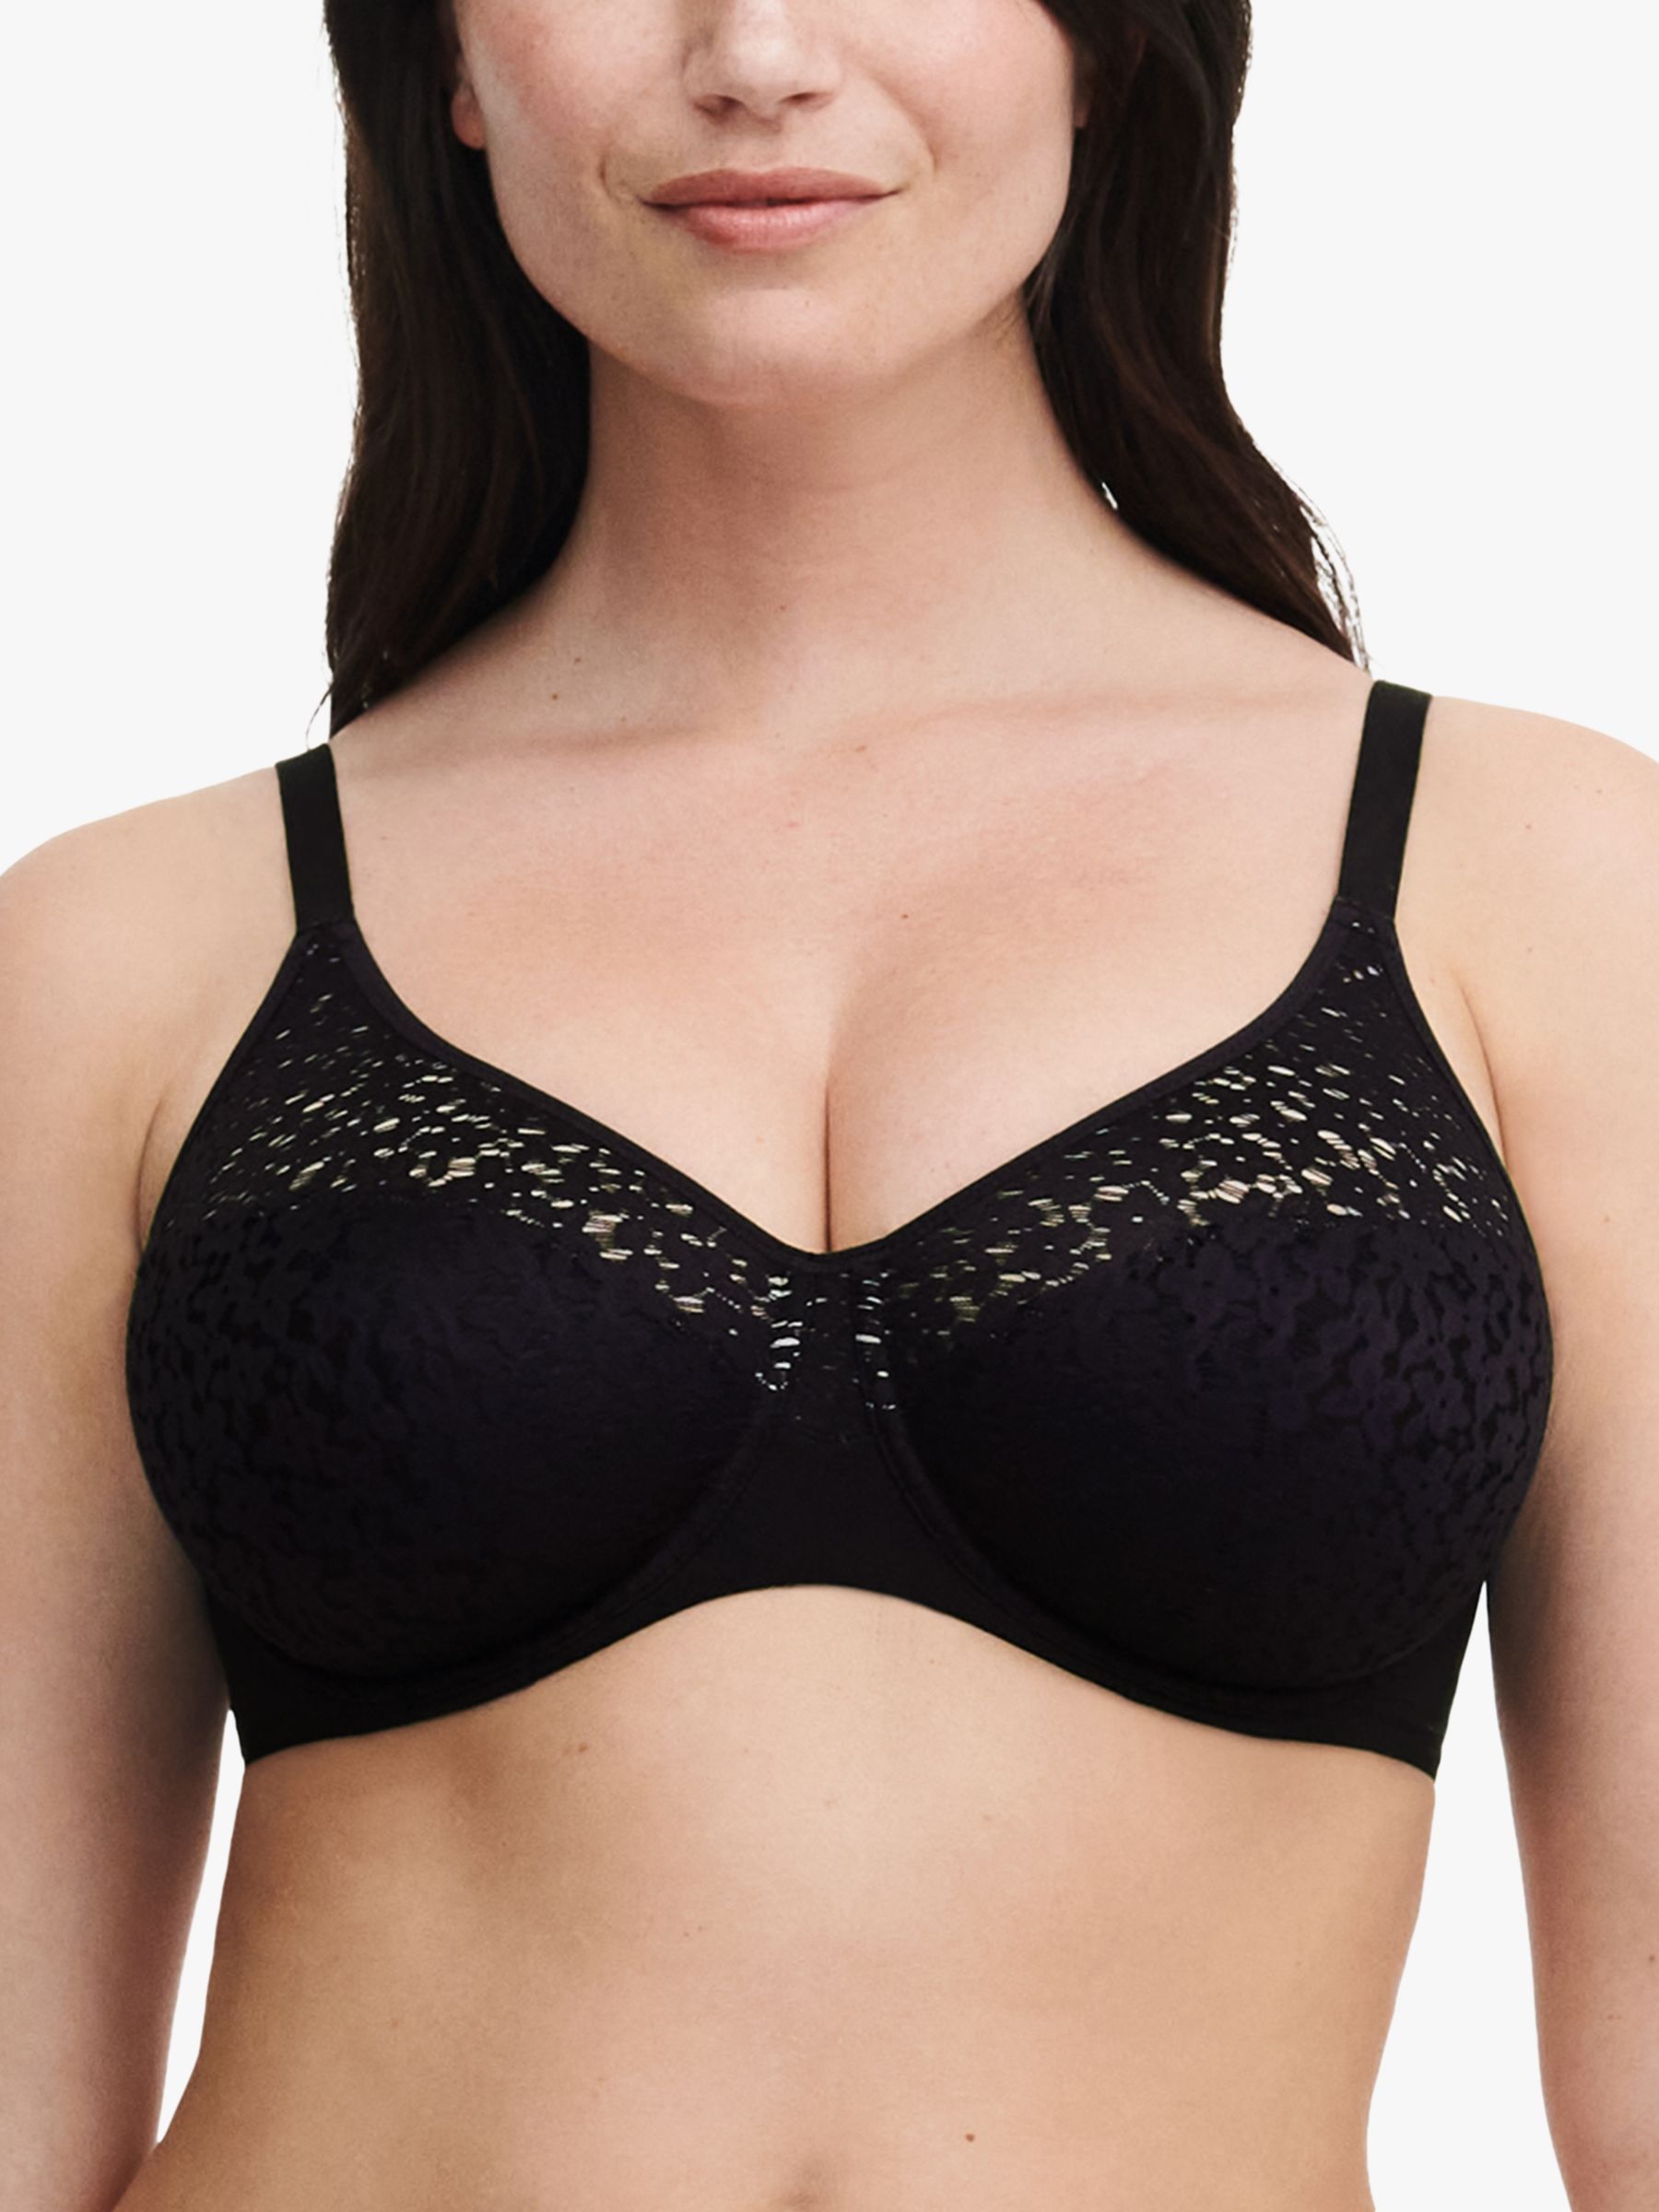 CHANTELLE - FREE EXPRESS SHIPPING -Courcelles Convertible Spacer Bra- Black